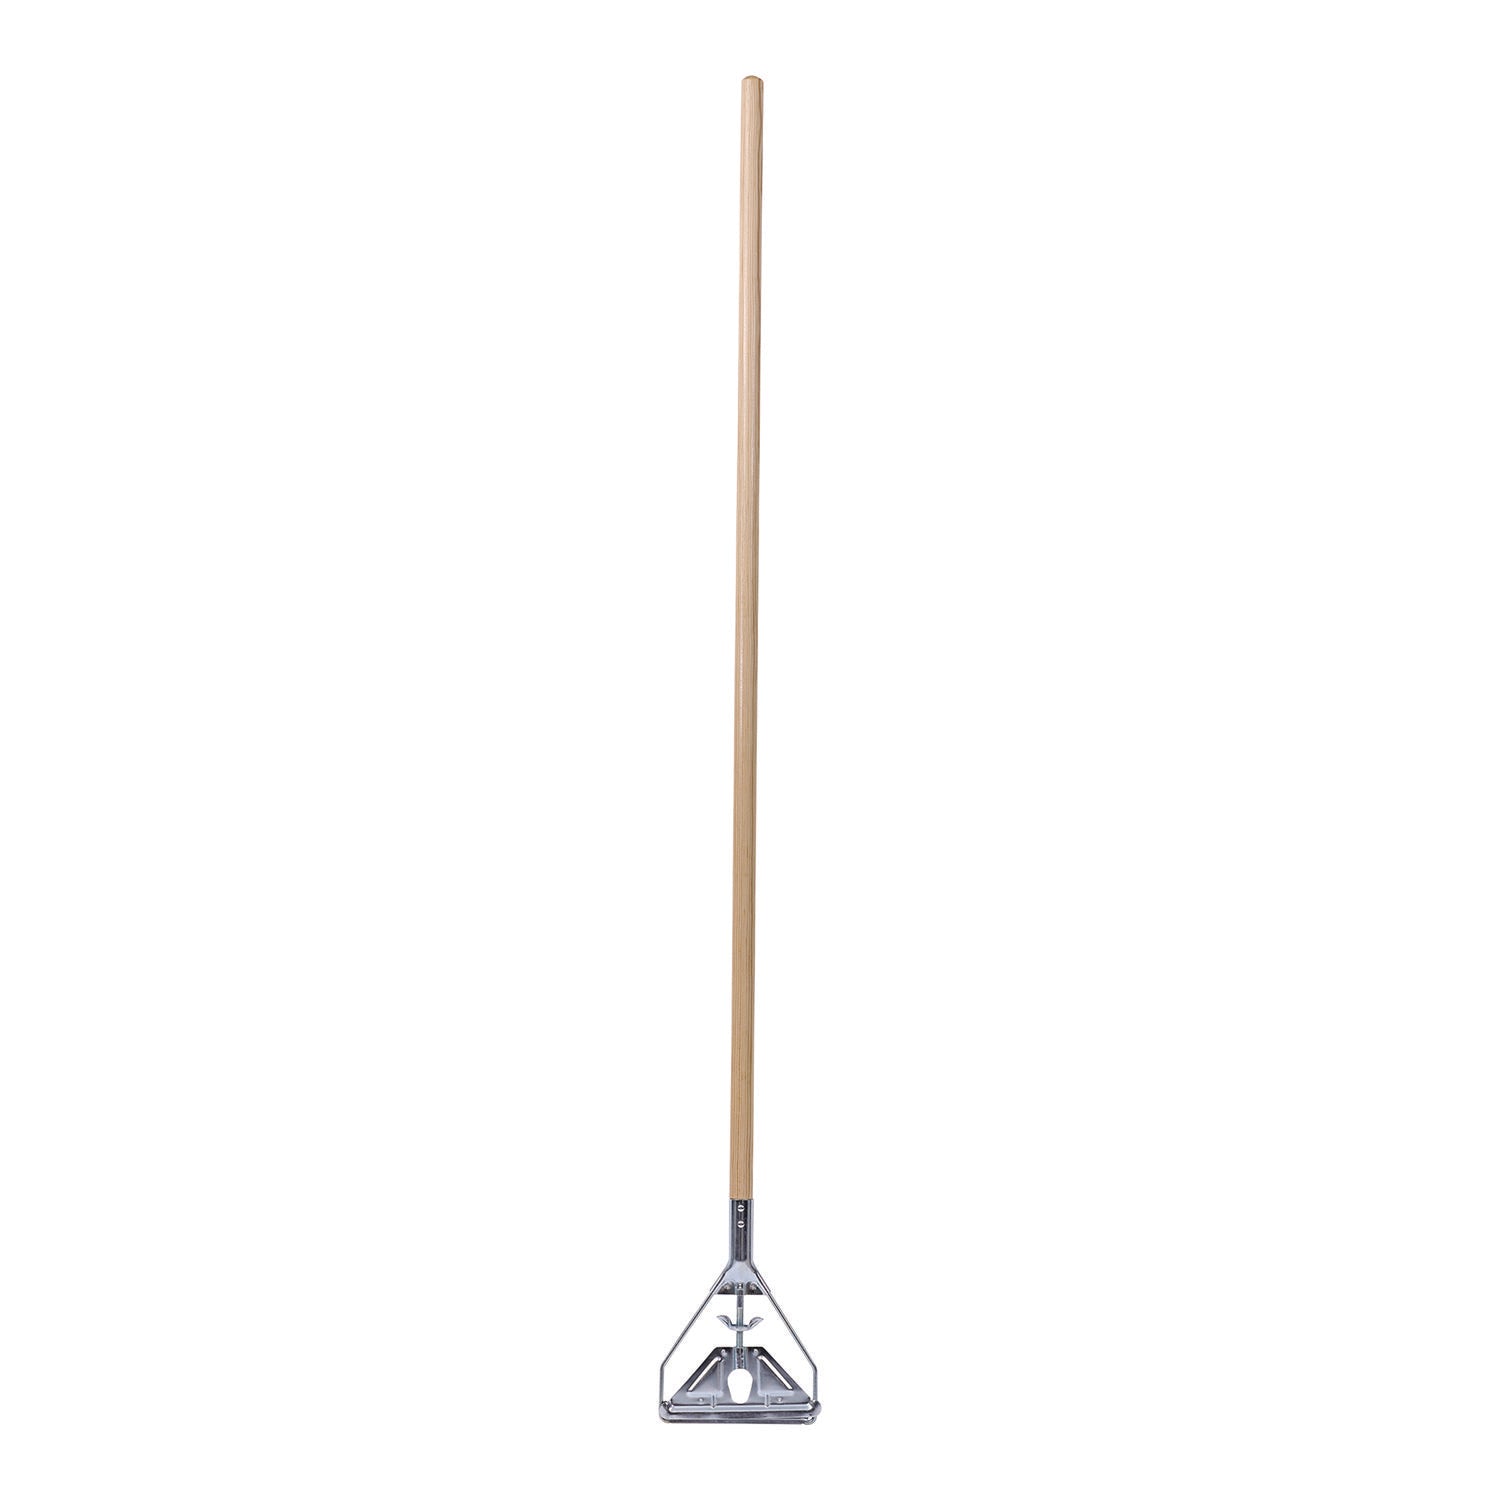 quick-change-metal-head-mop-handle-for-no-20-and-up-heads-62-wood-handle_bwk605 - 1